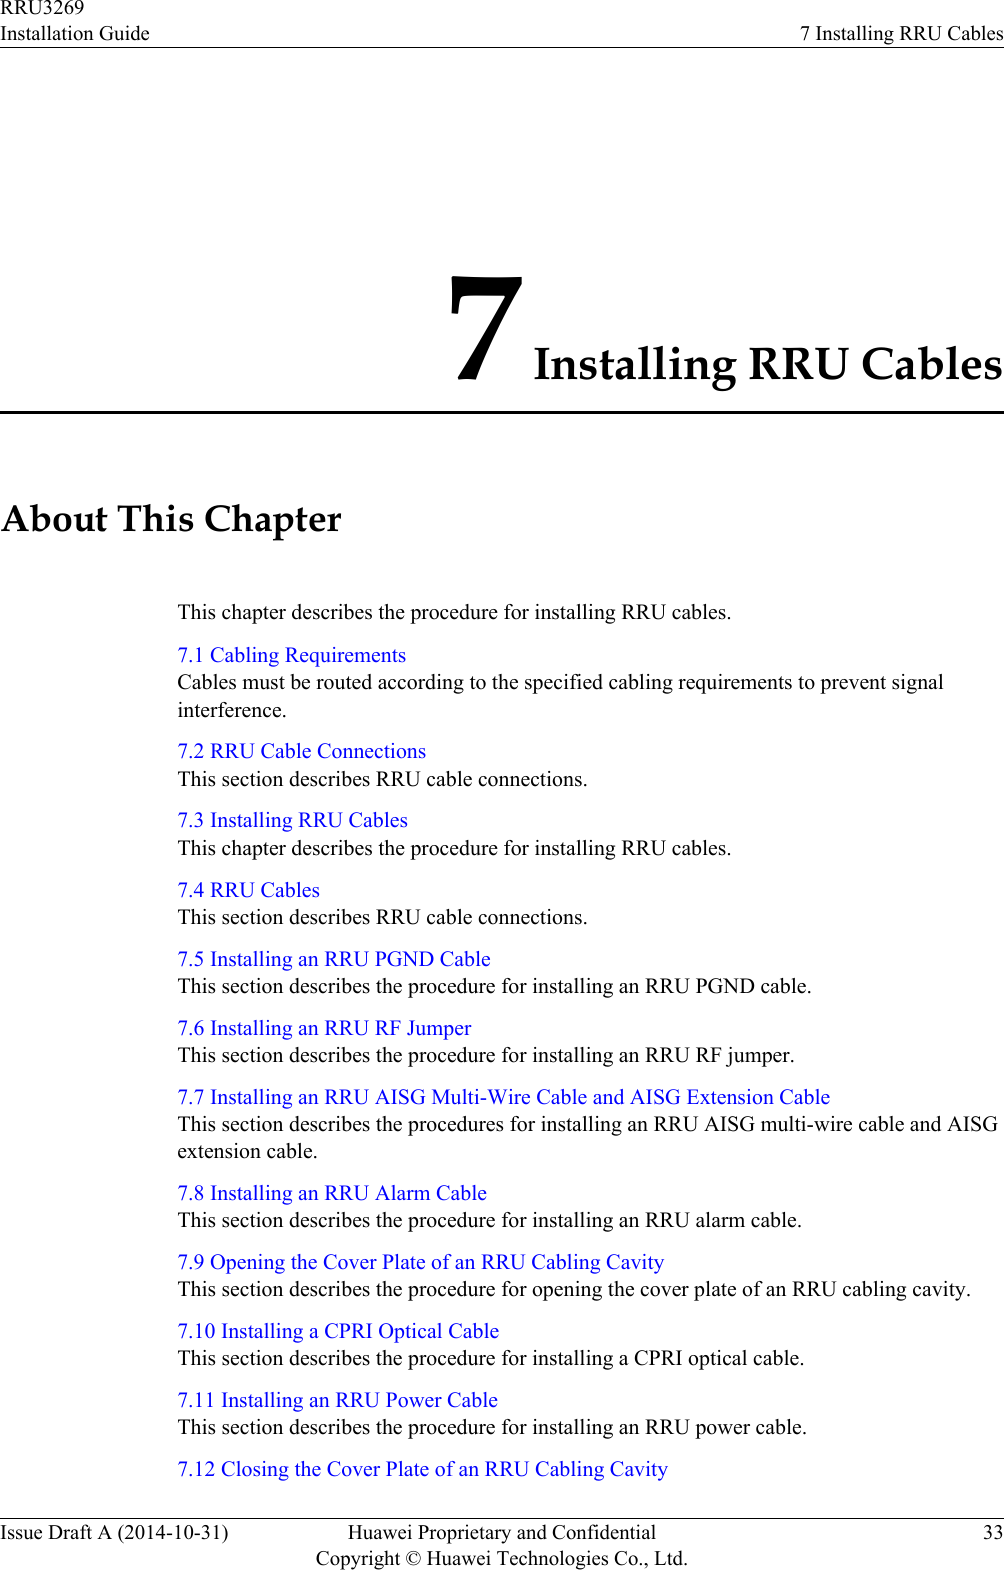 7 Installing RRU CablesAbout This ChapterThis chapter describes the procedure for installing RRU cables.7.1 Cabling RequirementsCables must be routed according to the specified cabling requirements to prevent signalinterference.7.2 RRU Cable ConnectionsThis section describes RRU cable connections.7.3 Installing RRU CablesThis chapter describes the procedure for installing RRU cables.7.4 RRU CablesThis section describes RRU cable connections.7.5 Installing an RRU PGND CableThis section describes the procedure for installing an RRU PGND cable.7.6 Installing an RRU RF JumperThis section describes the procedure for installing an RRU RF jumper.7.7 Installing an RRU AISG Multi-Wire Cable and AISG Extension CableThis section describes the procedures for installing an RRU AISG multi-wire cable and AISGextension cable.7.8 Installing an RRU Alarm CableThis section describes the procedure for installing an RRU alarm cable.7.9 Opening the Cover Plate of an RRU Cabling CavityThis section describes the procedure for opening the cover plate of an RRU cabling cavity.7.10 Installing a CPRI Optical CableThis section describes the procedure for installing a CPRI optical cable.7.11 Installing an RRU Power CableThis section describes the procedure for installing an RRU power cable.7.12 Closing the Cover Plate of an RRU Cabling CavityRRU3269Installation Guide 7 Installing RRU CablesIssue Draft A (2014-10-31) Huawei Proprietary and ConfidentialCopyright © Huawei Technologies Co., Ltd.33